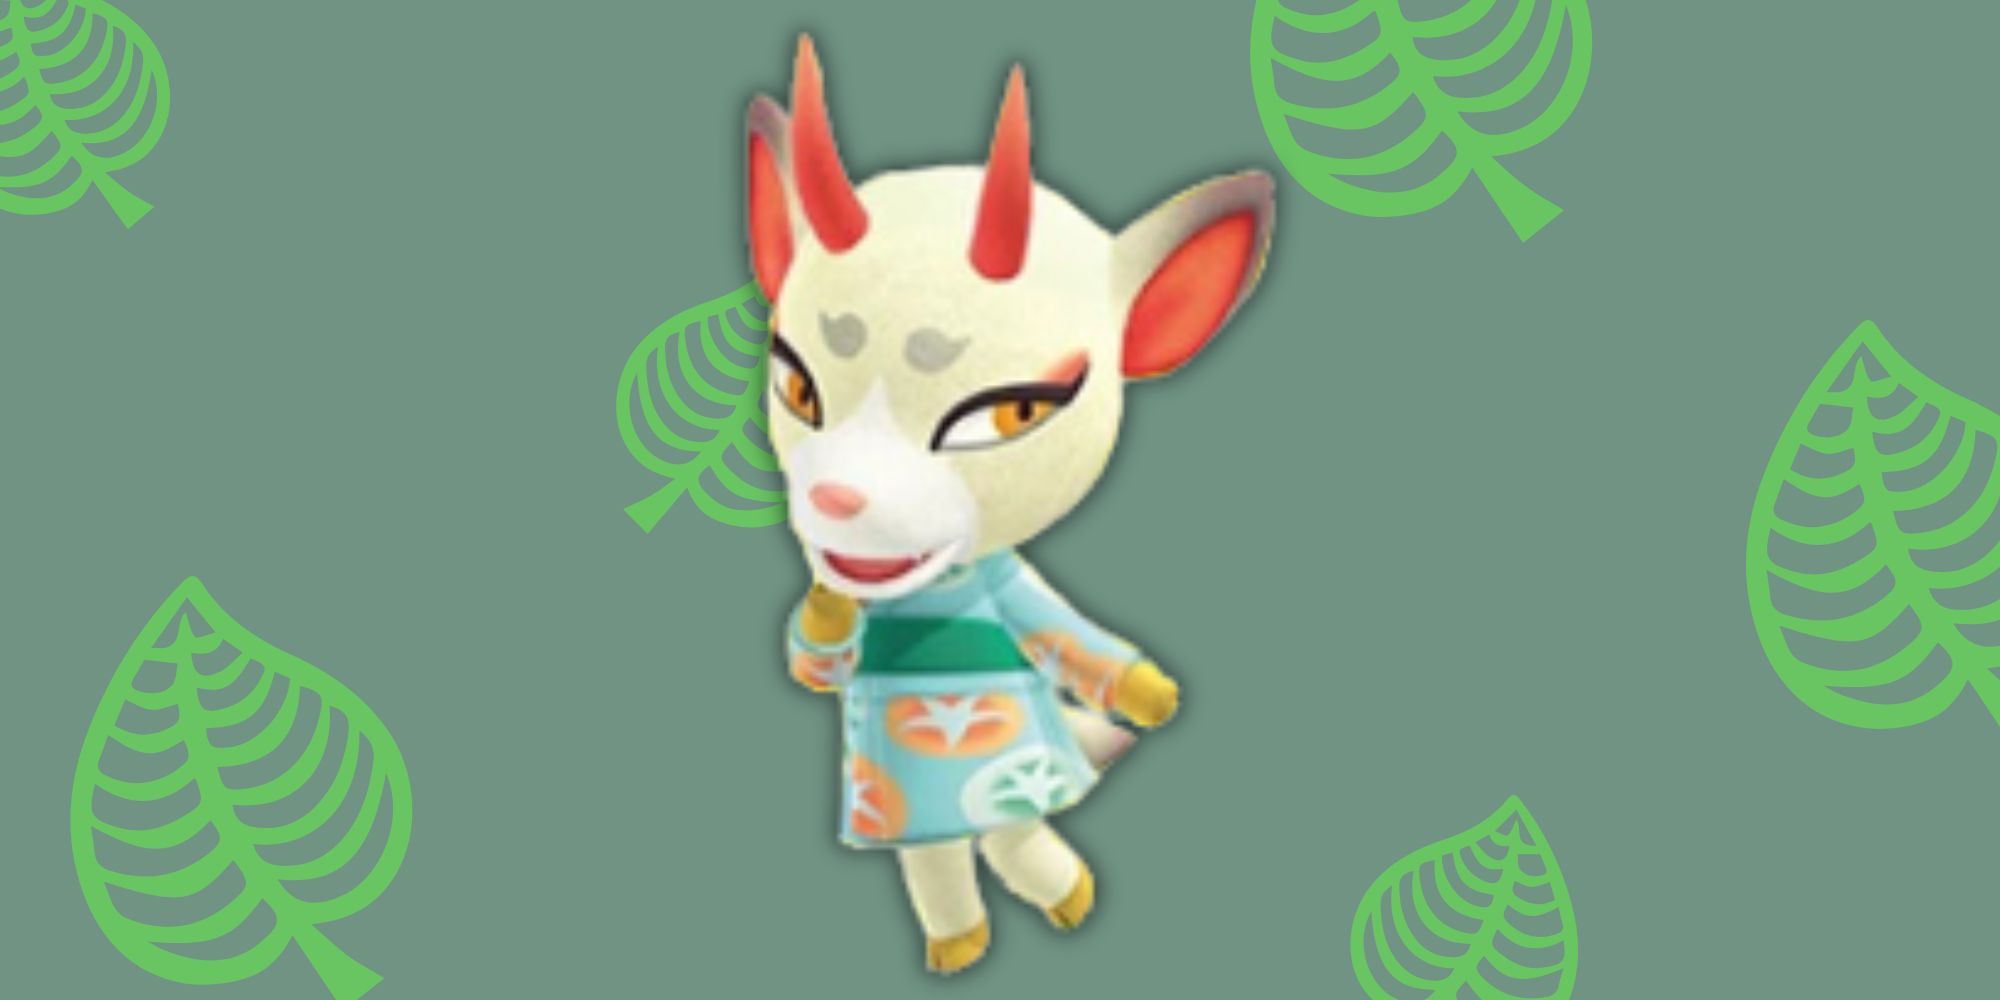 Shino from Animal Crossing in front of leaf-patterned backdrop